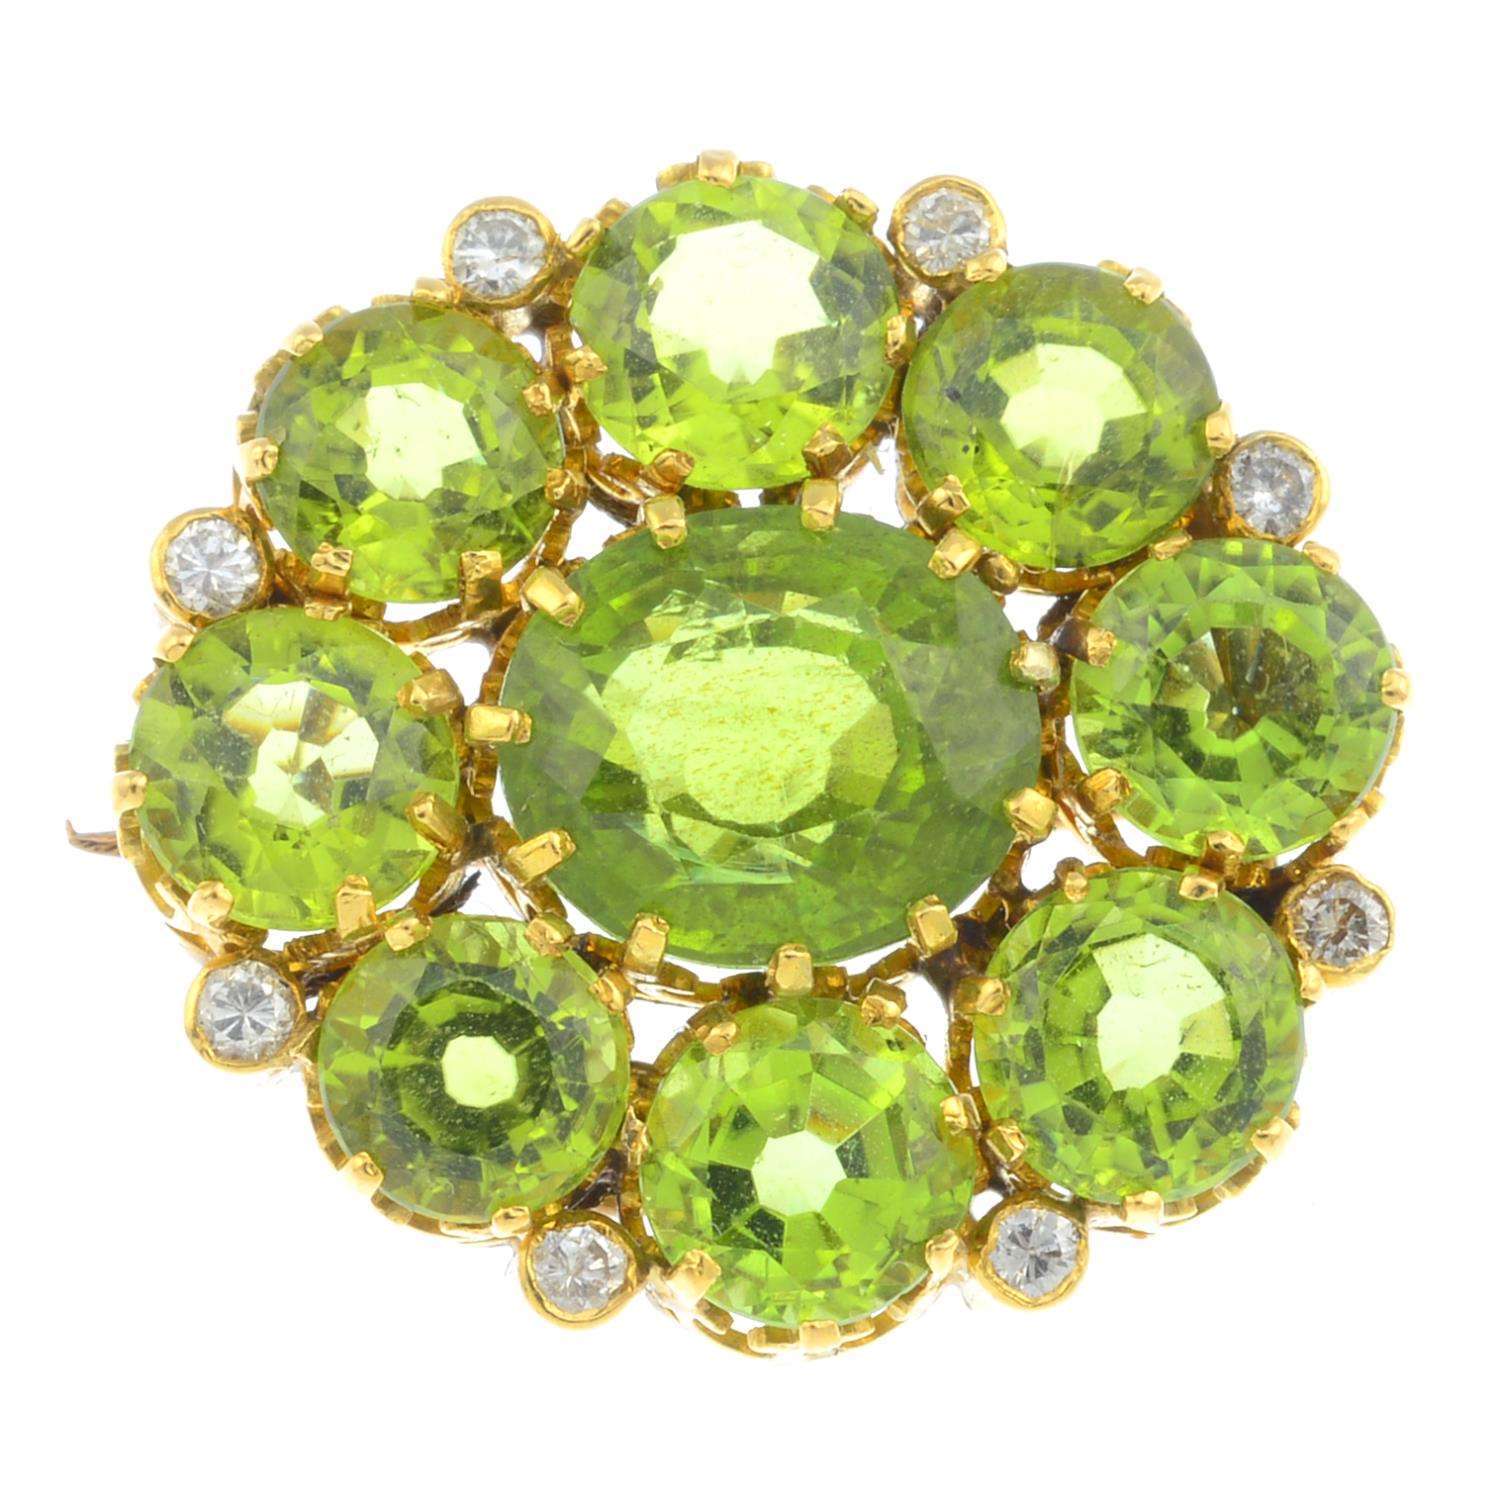 An early 20th century gold, peridot and diamond cluster brooch. The oval-shape peridot, with